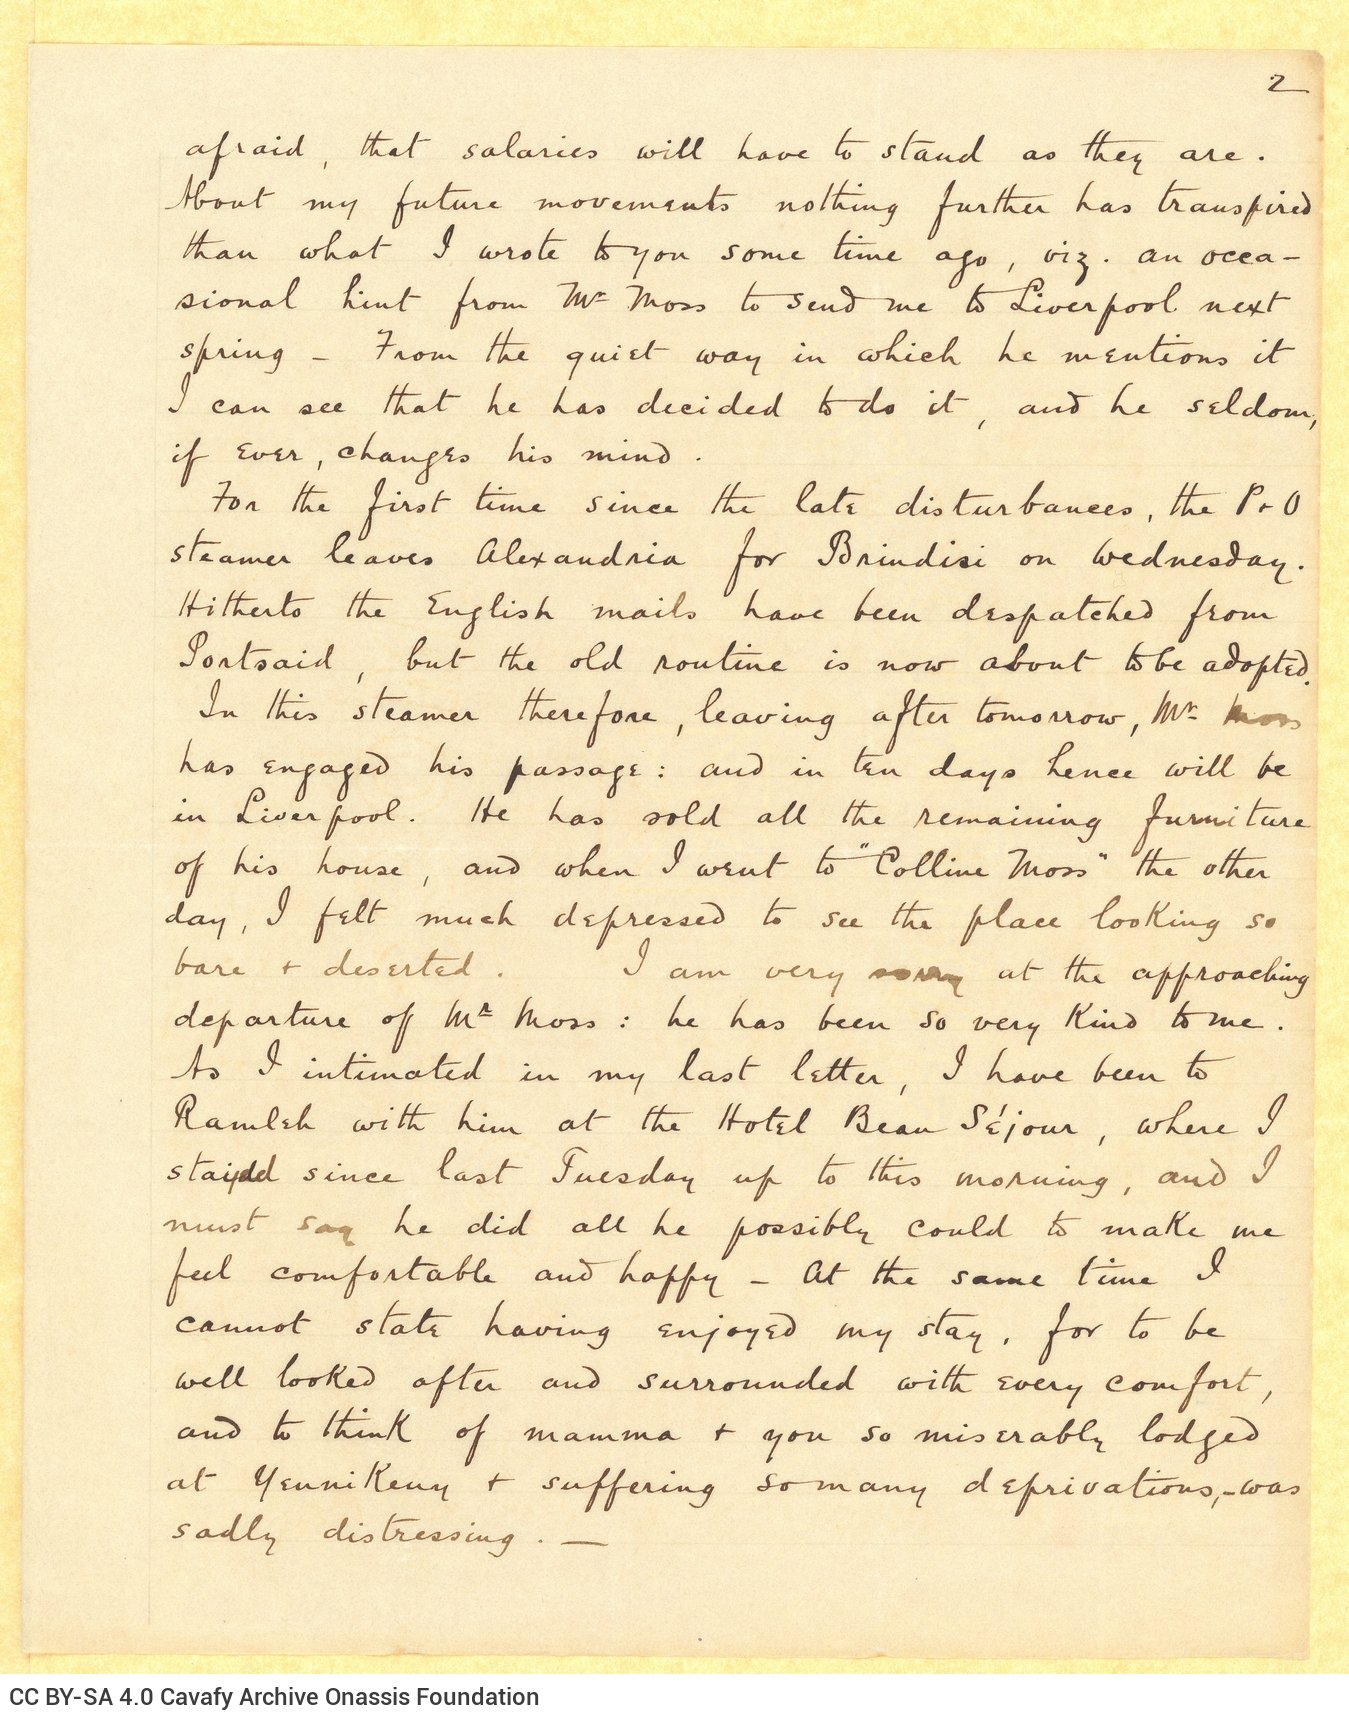 Handwritten letter by John Cavafy to C. P. Cavafy, on two double sheet letterheads of R. J. Moss & Co., Alexandria. Pages 2-5